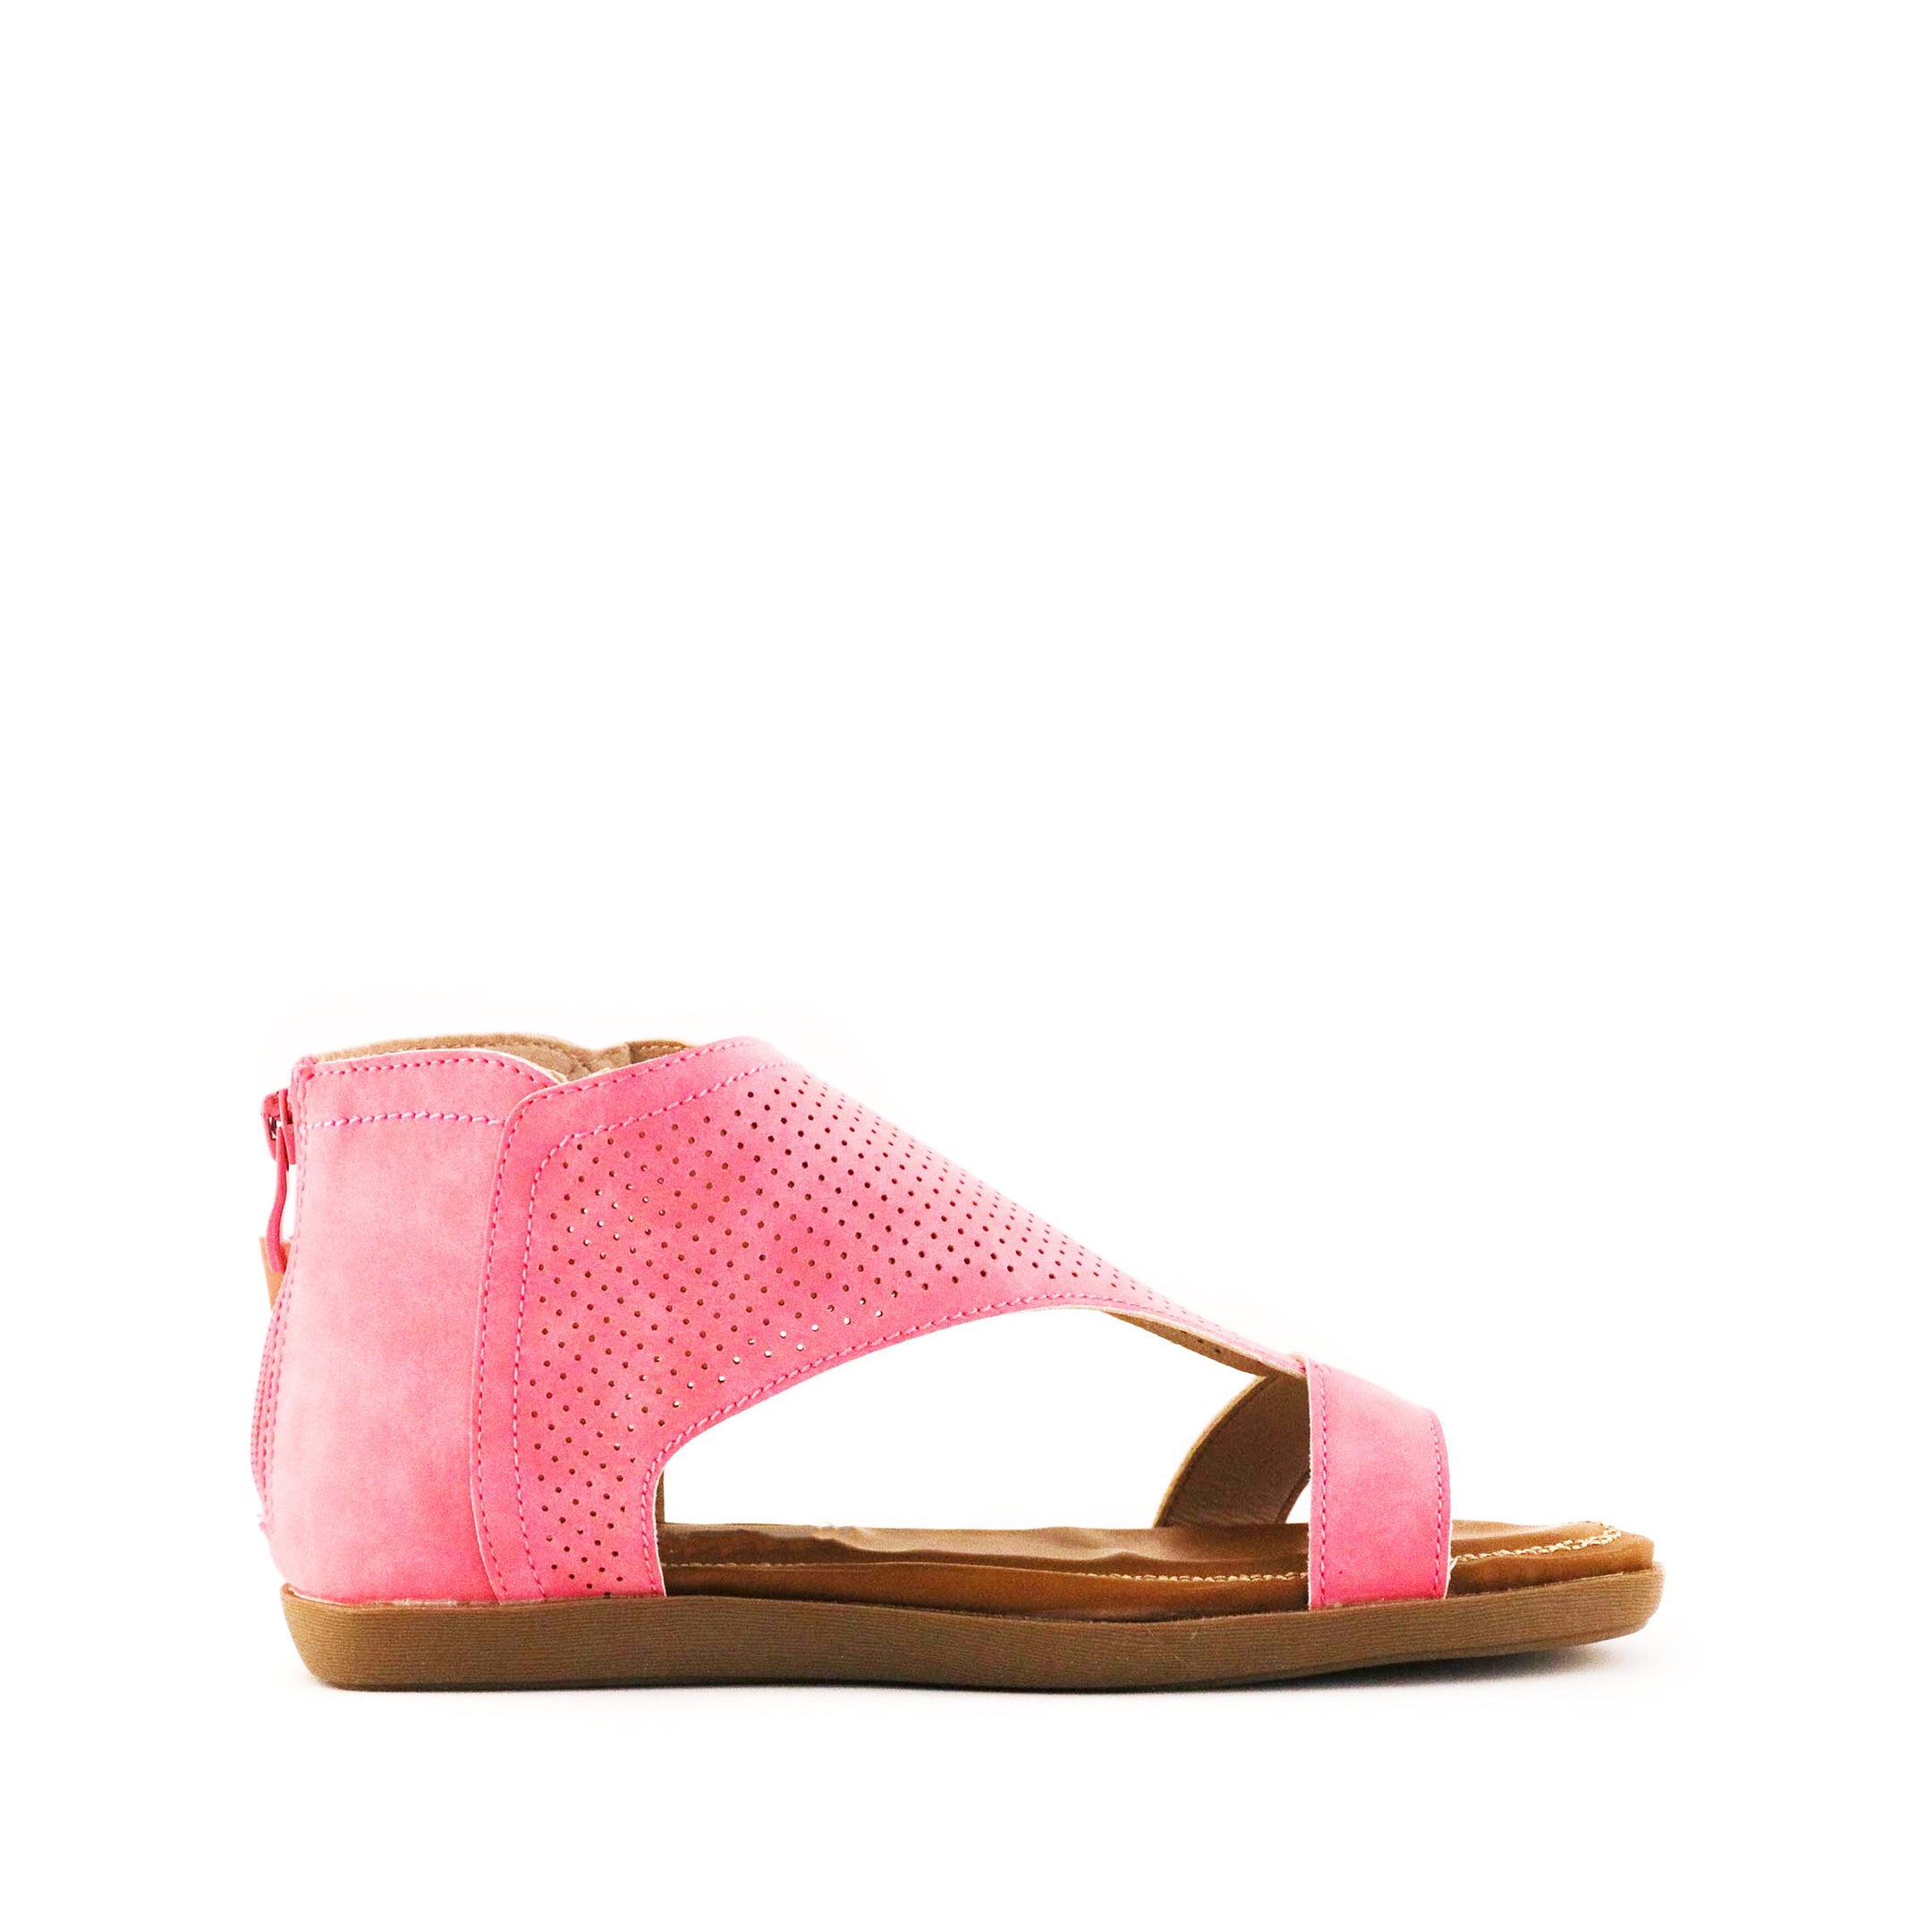 Buy Women's Coop Rose Perforated Sandal by Nest Shoes